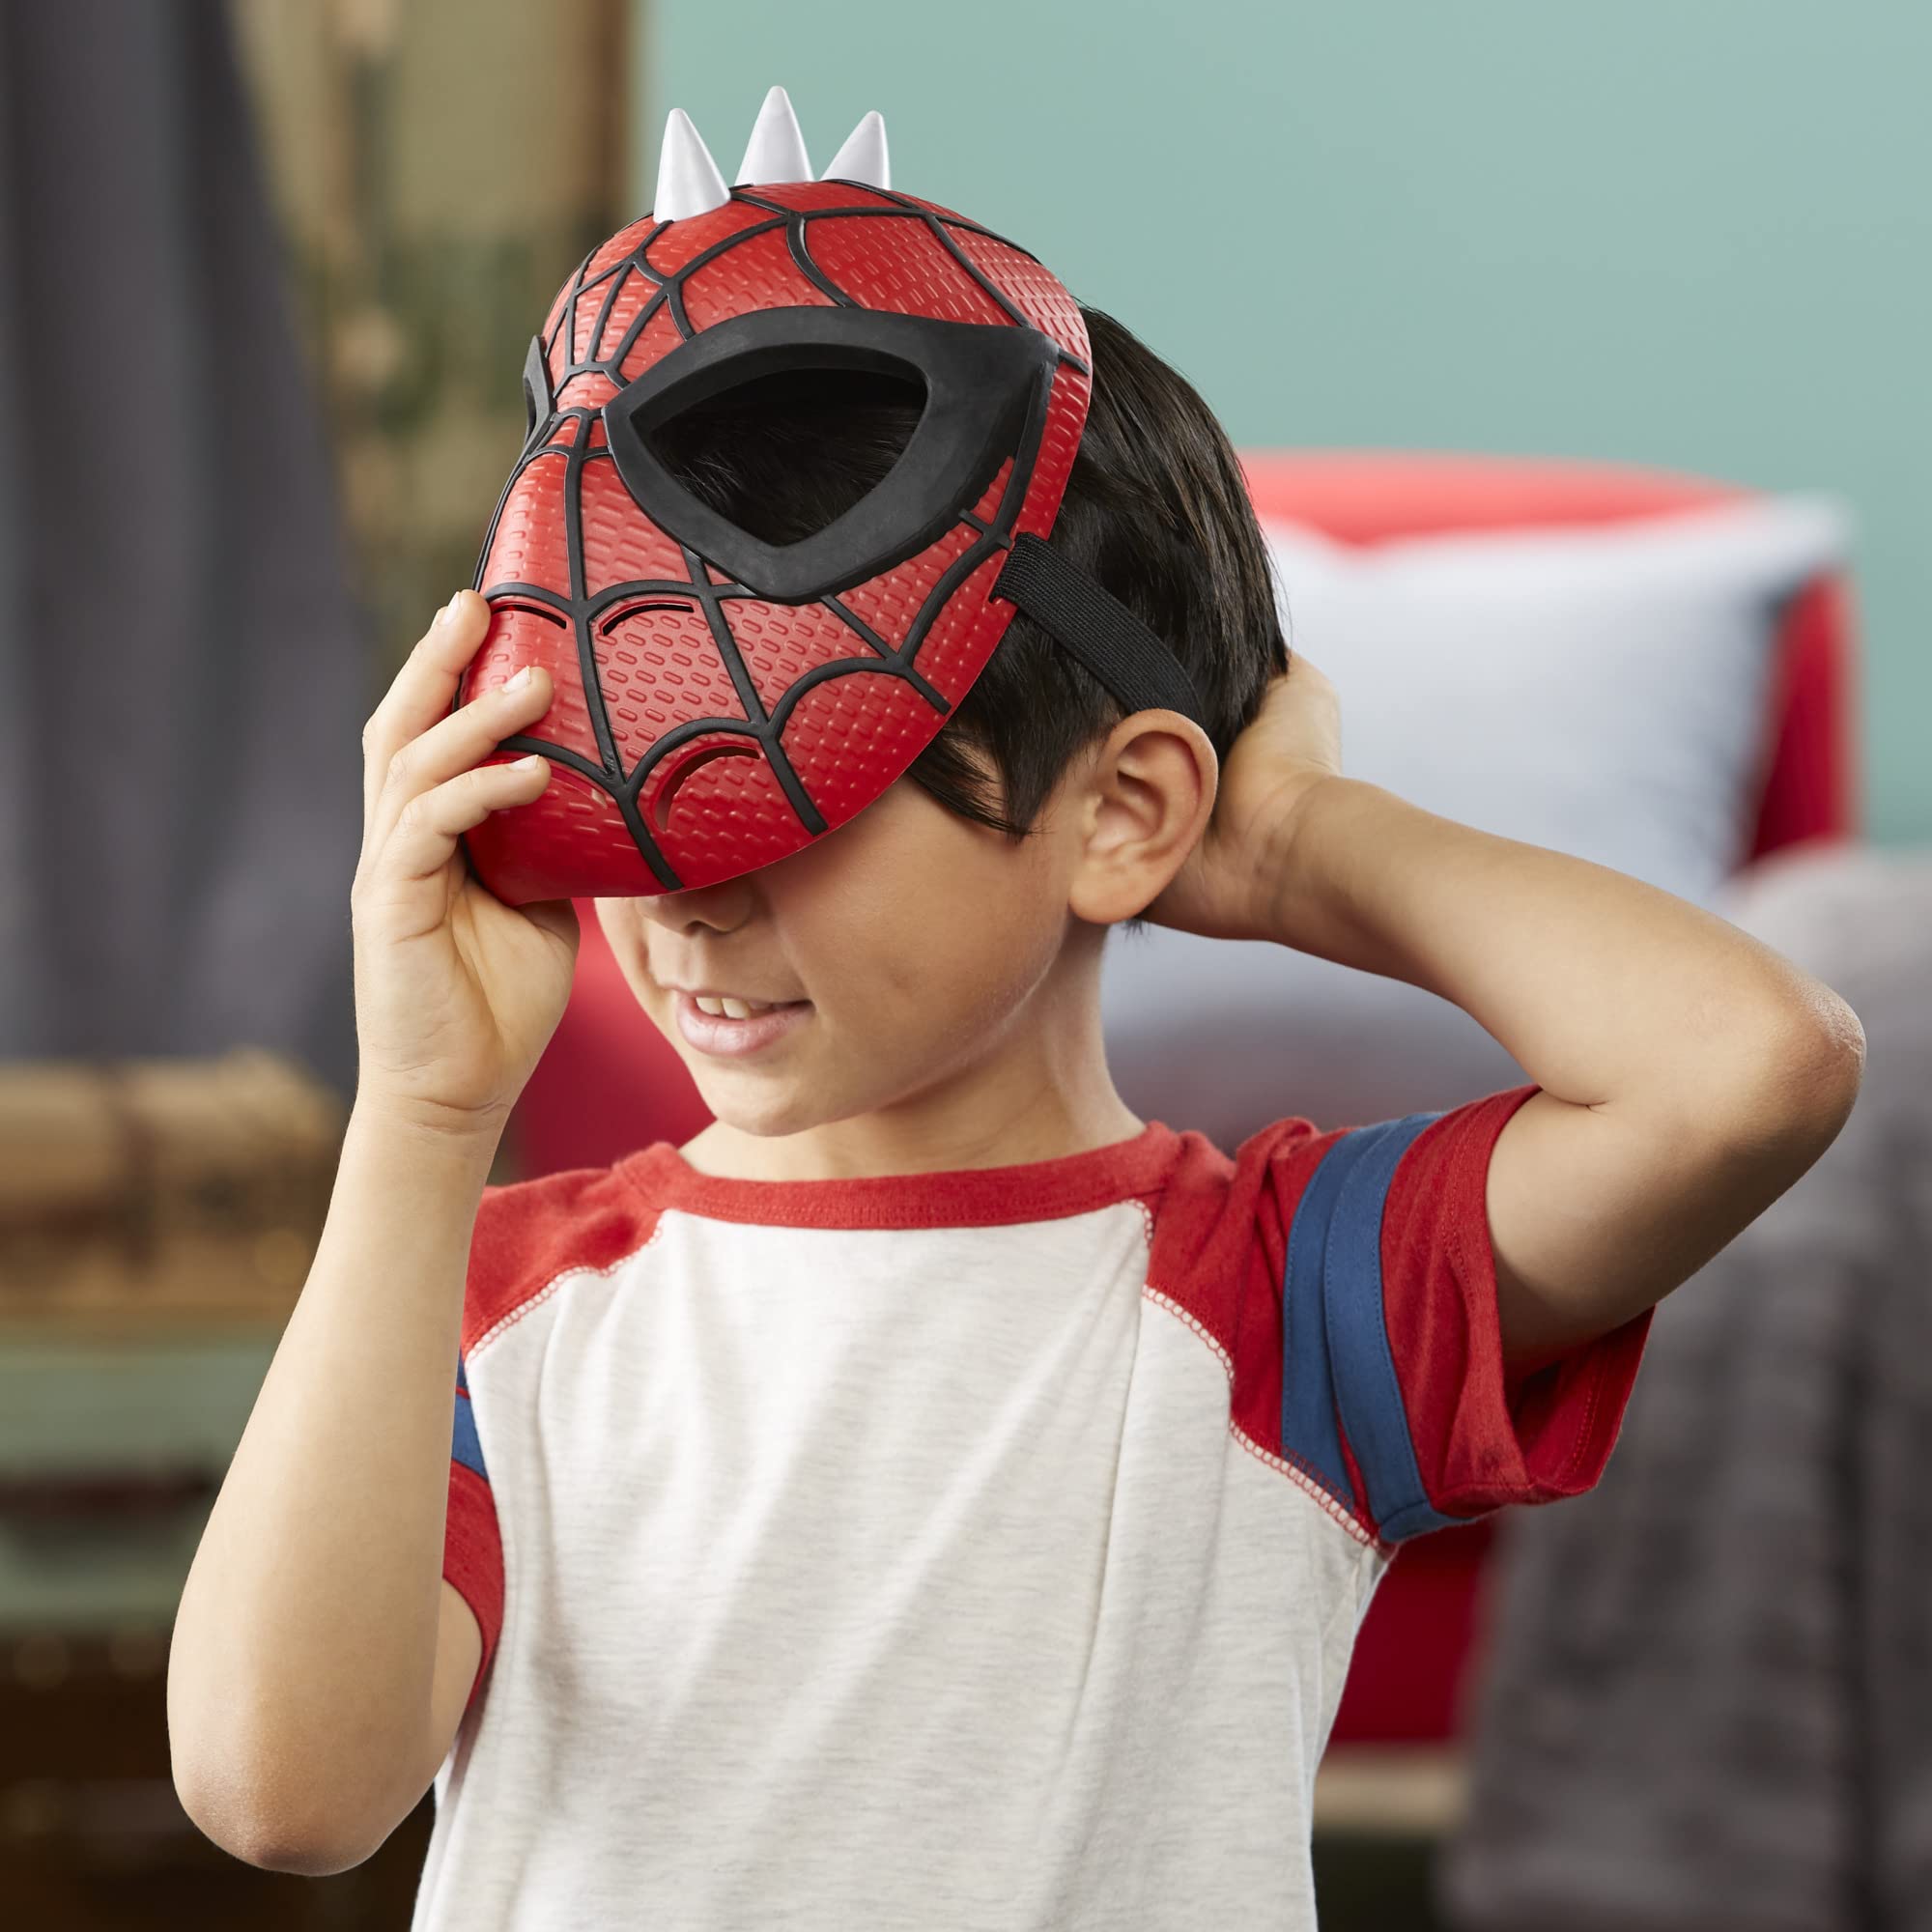 Spider-Man Marvel Across The Spider-Verse Spider-Punk Mask for Kids Roleplay and Costume Dress Up, Marvel Toys for Kids Ages 5 and Up,Red, Black